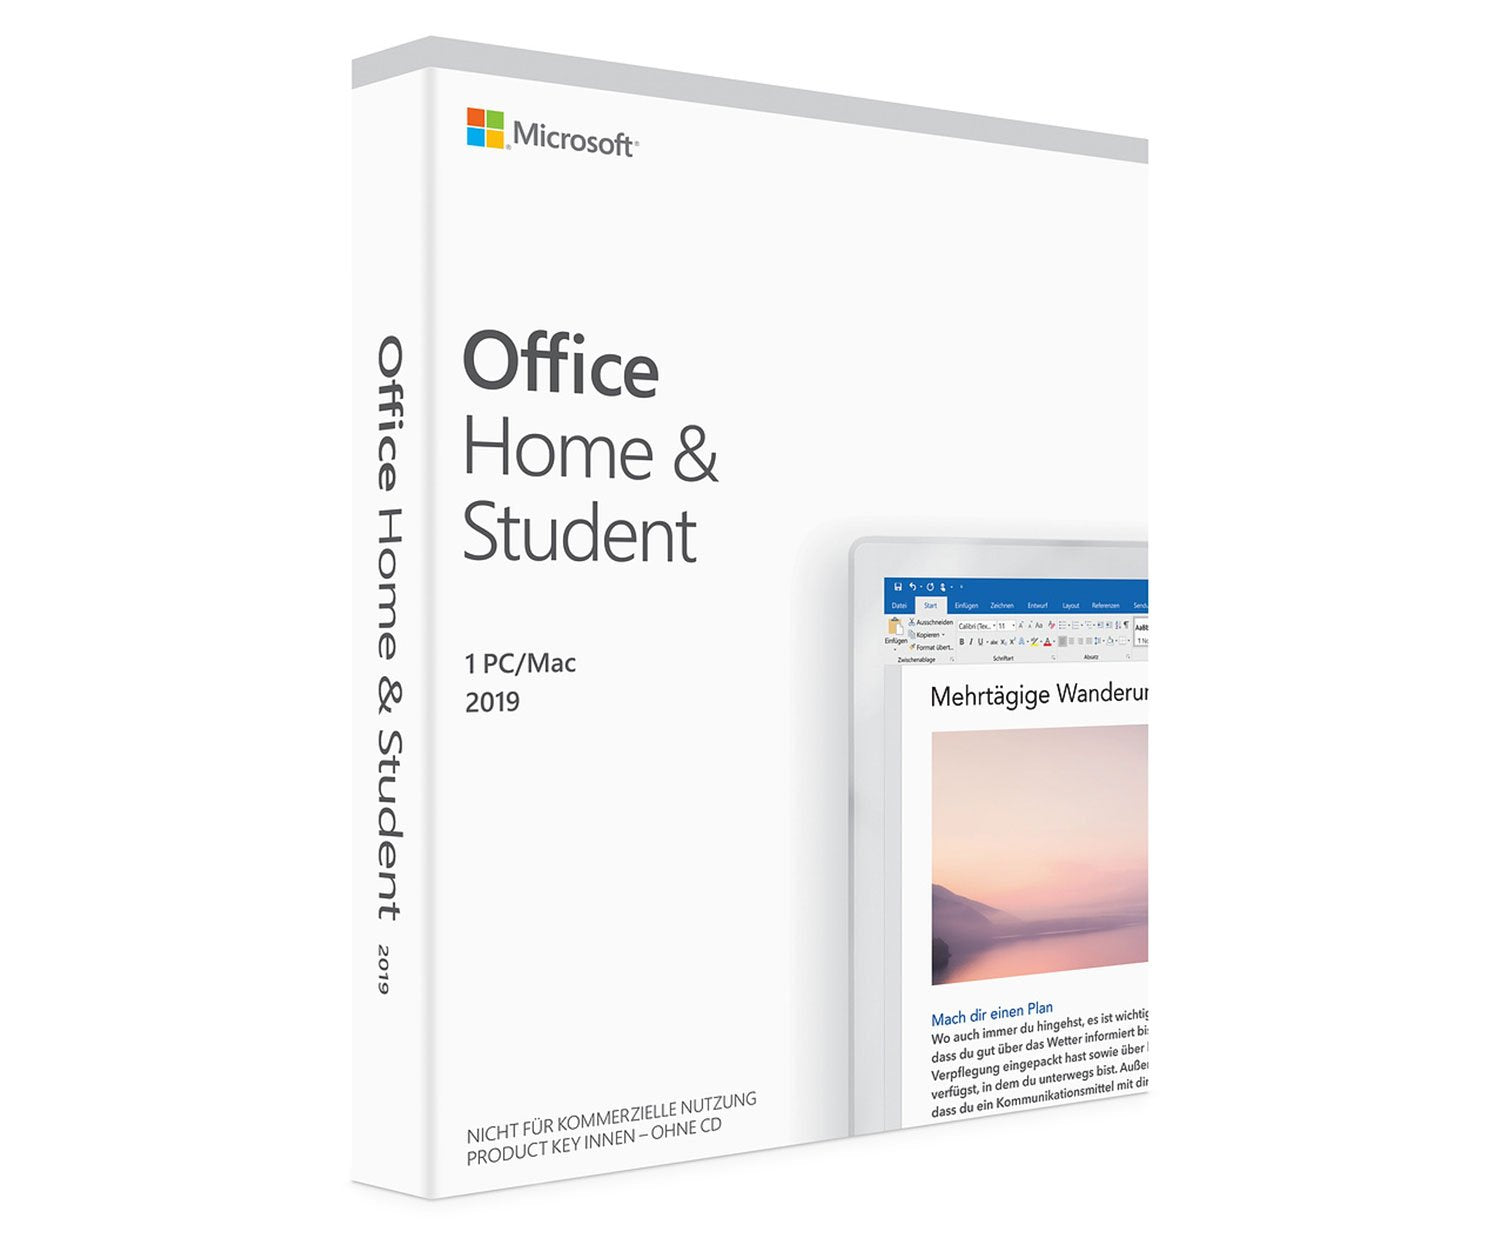 What Is Microsoft Office Home And Student 2019